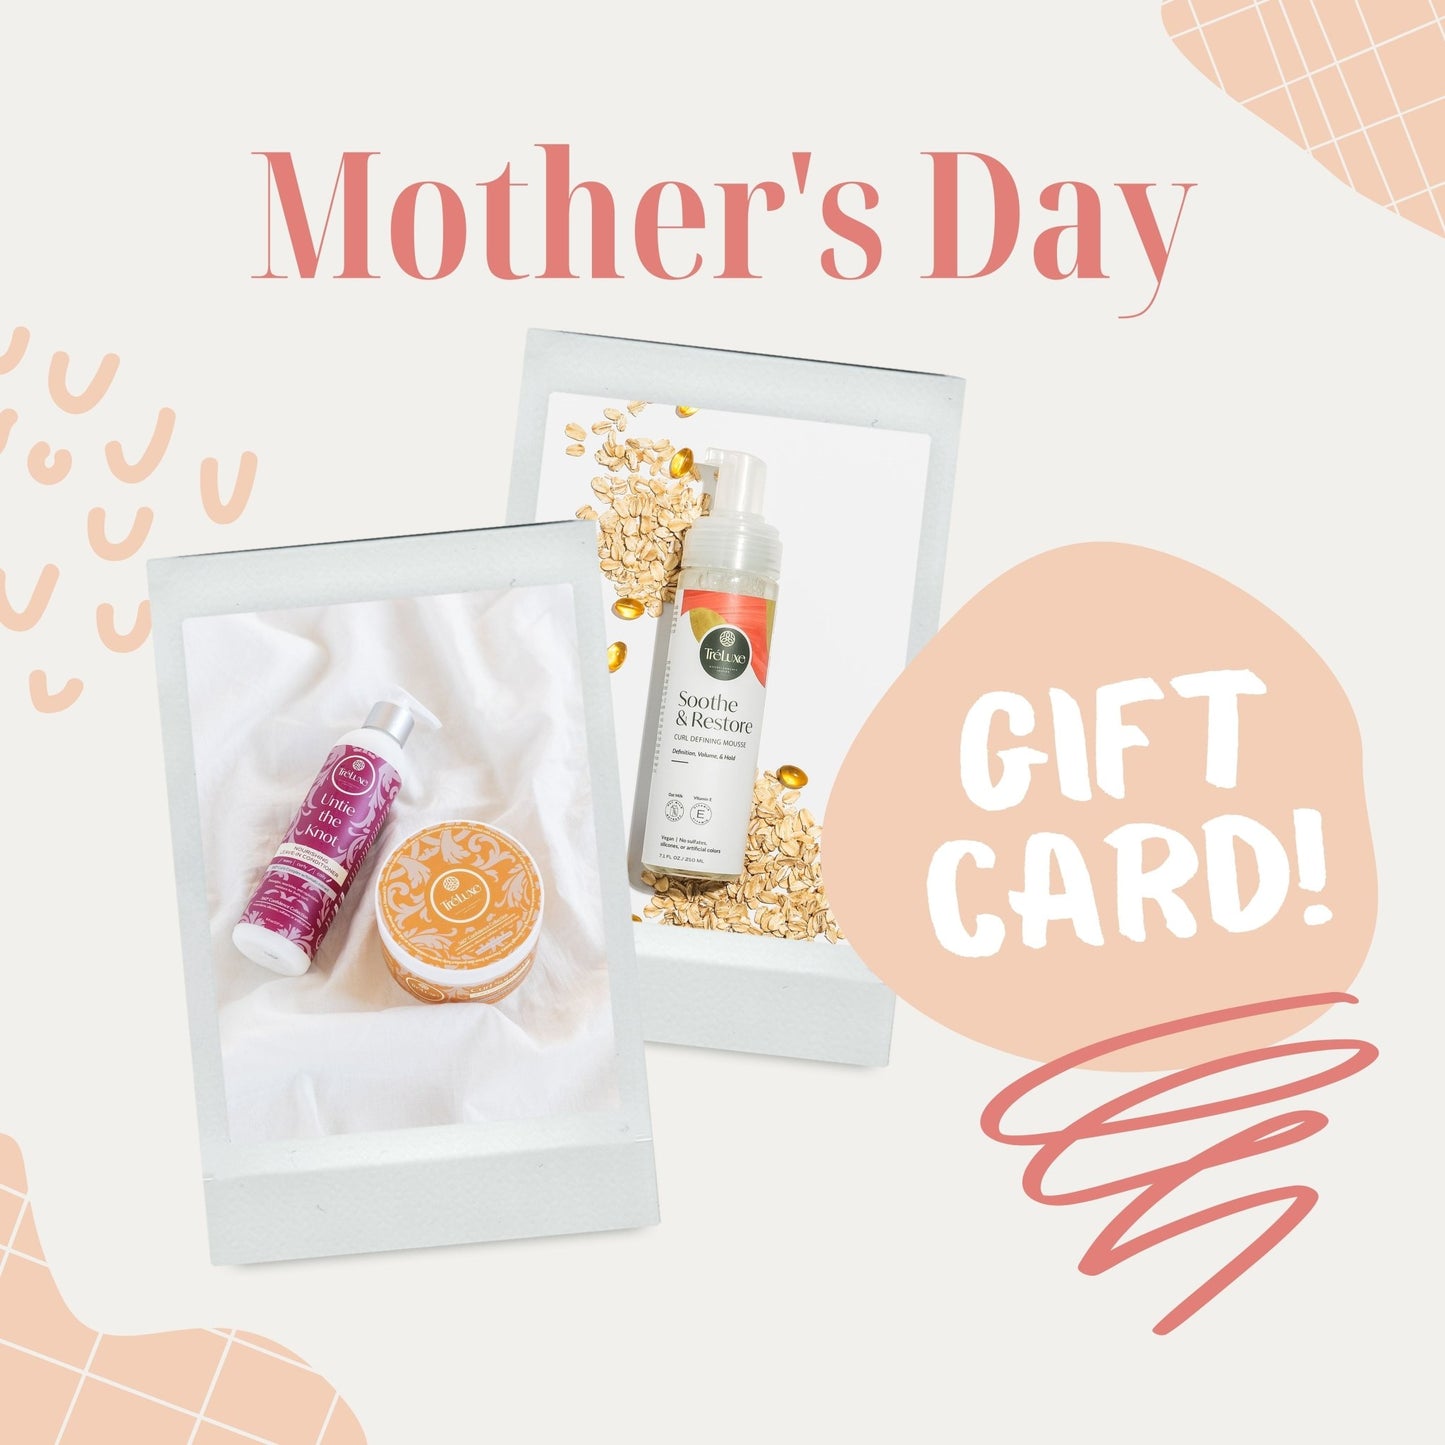 Mother's Day Gift Card - Sunshine Curls